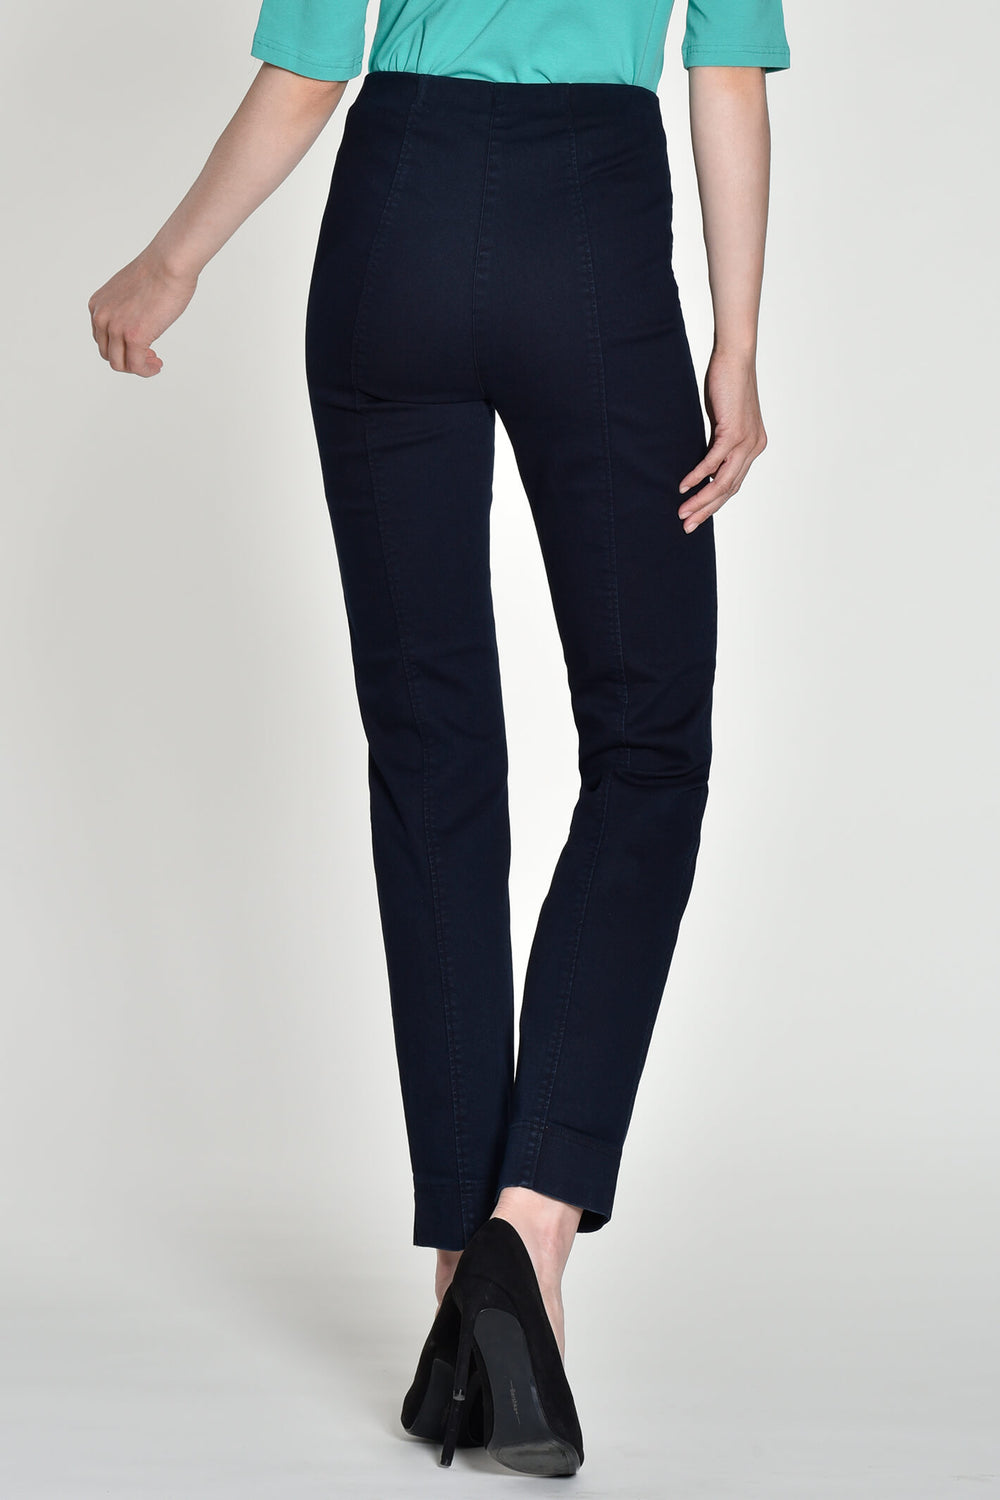 Robell Marie 51639-5448-69 78cm Navy Blue Pull-On Trousers - Shirley Allum Boutique